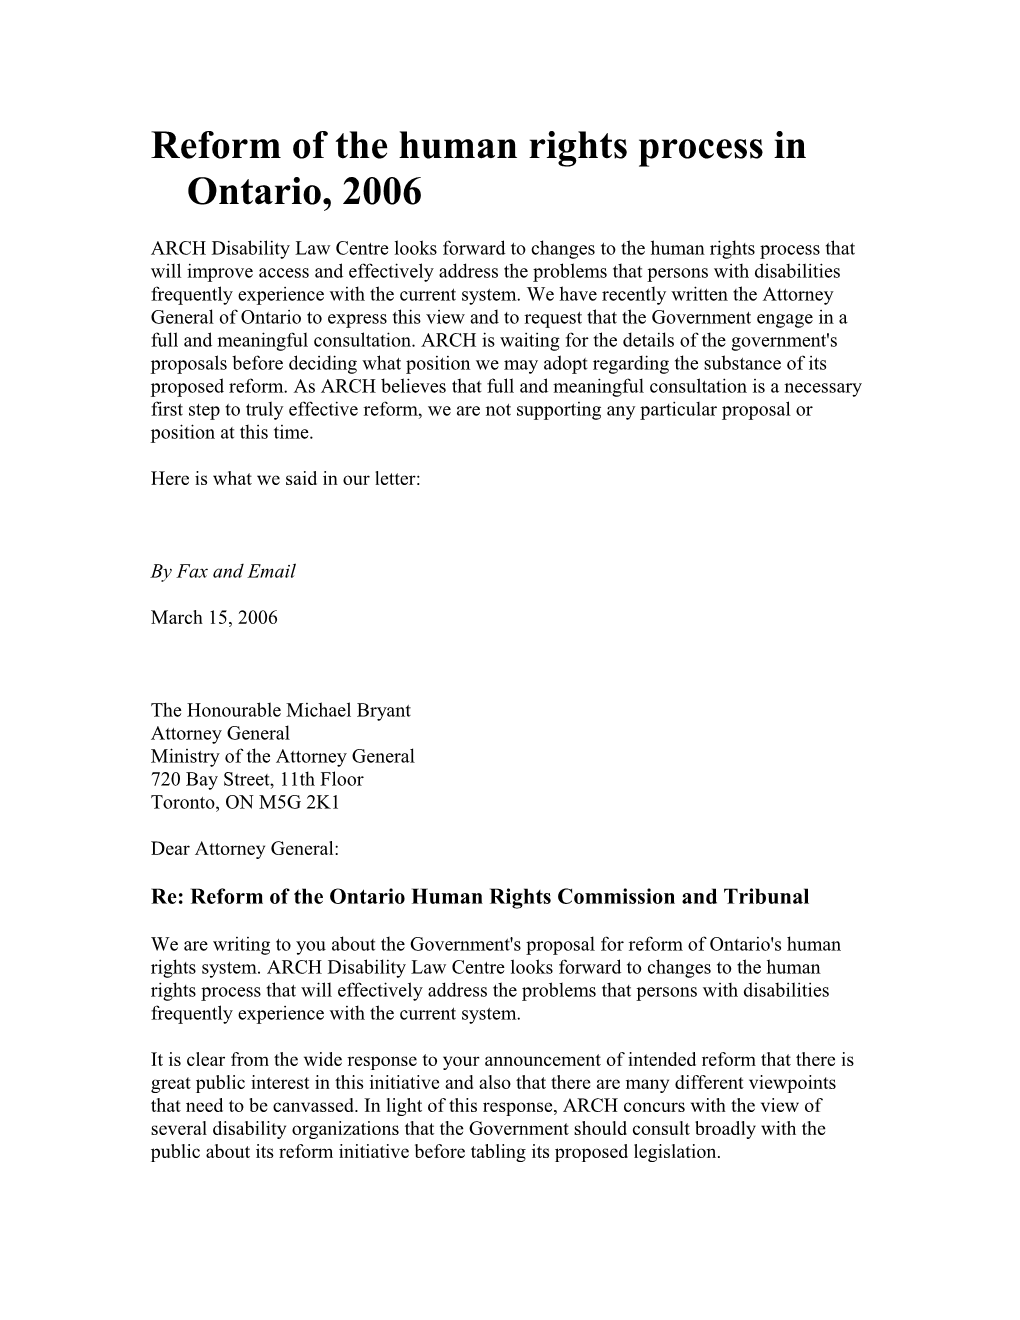 Reform of the Human Rights Process in Ontario, 2006